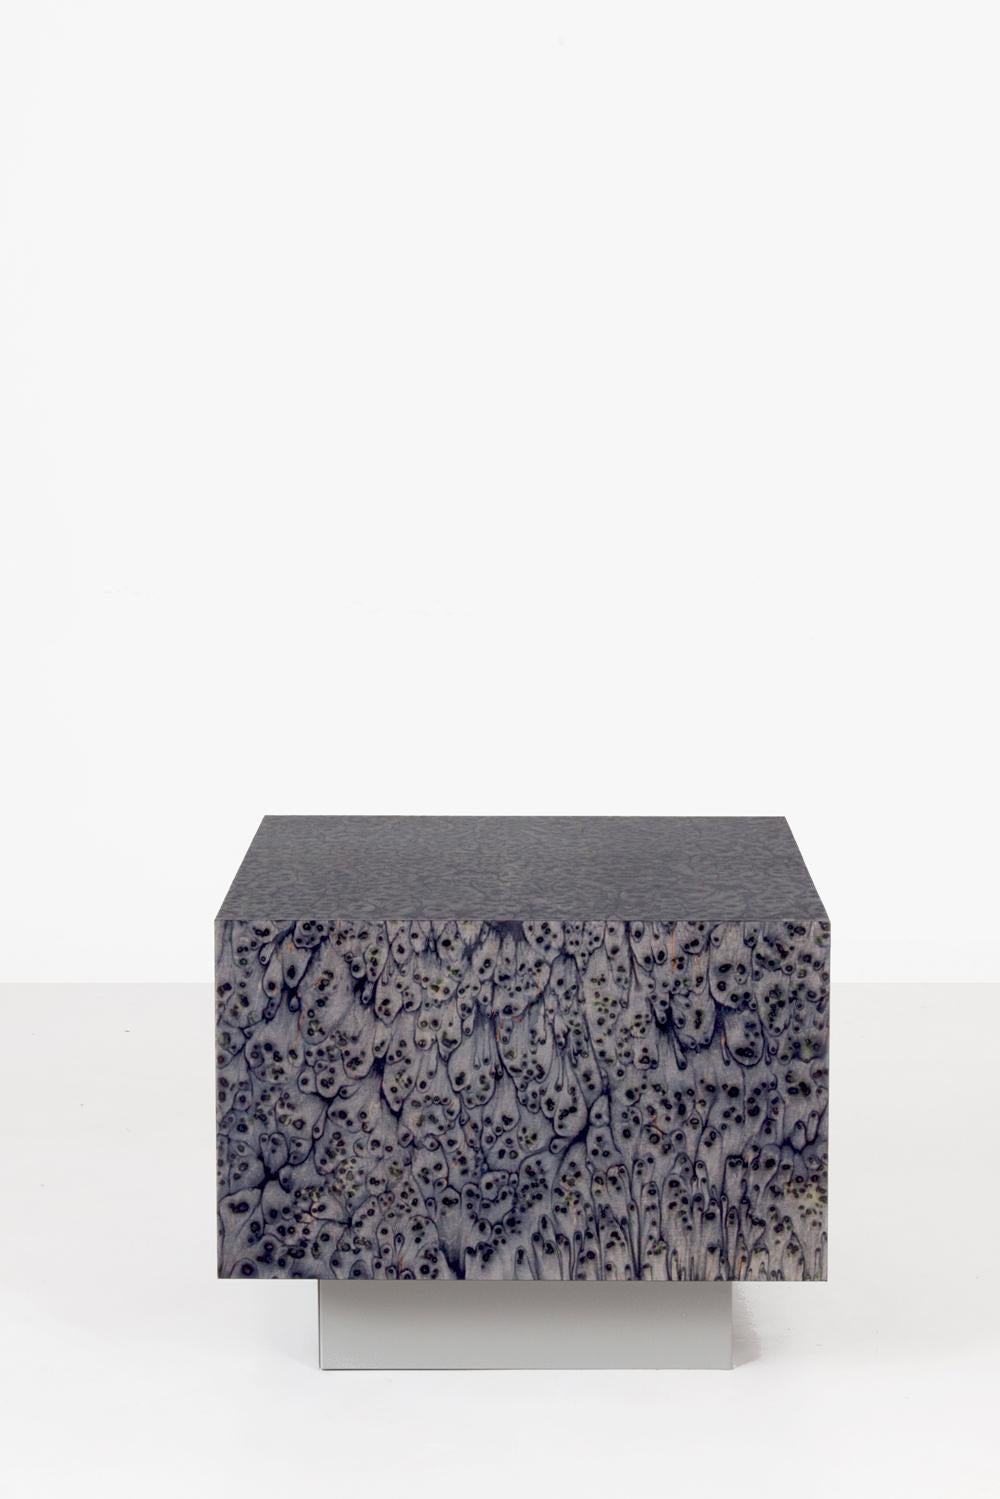 Osis haze block cube by Llot Llov
Dimensions: W 50 x L 50 x H 40 cm
Materials: multiplex and birch


With the new OSIS BLOCK EDITION, which is inspired by the shape of various rectangular bodies and is used as coffee tables or desks, the design